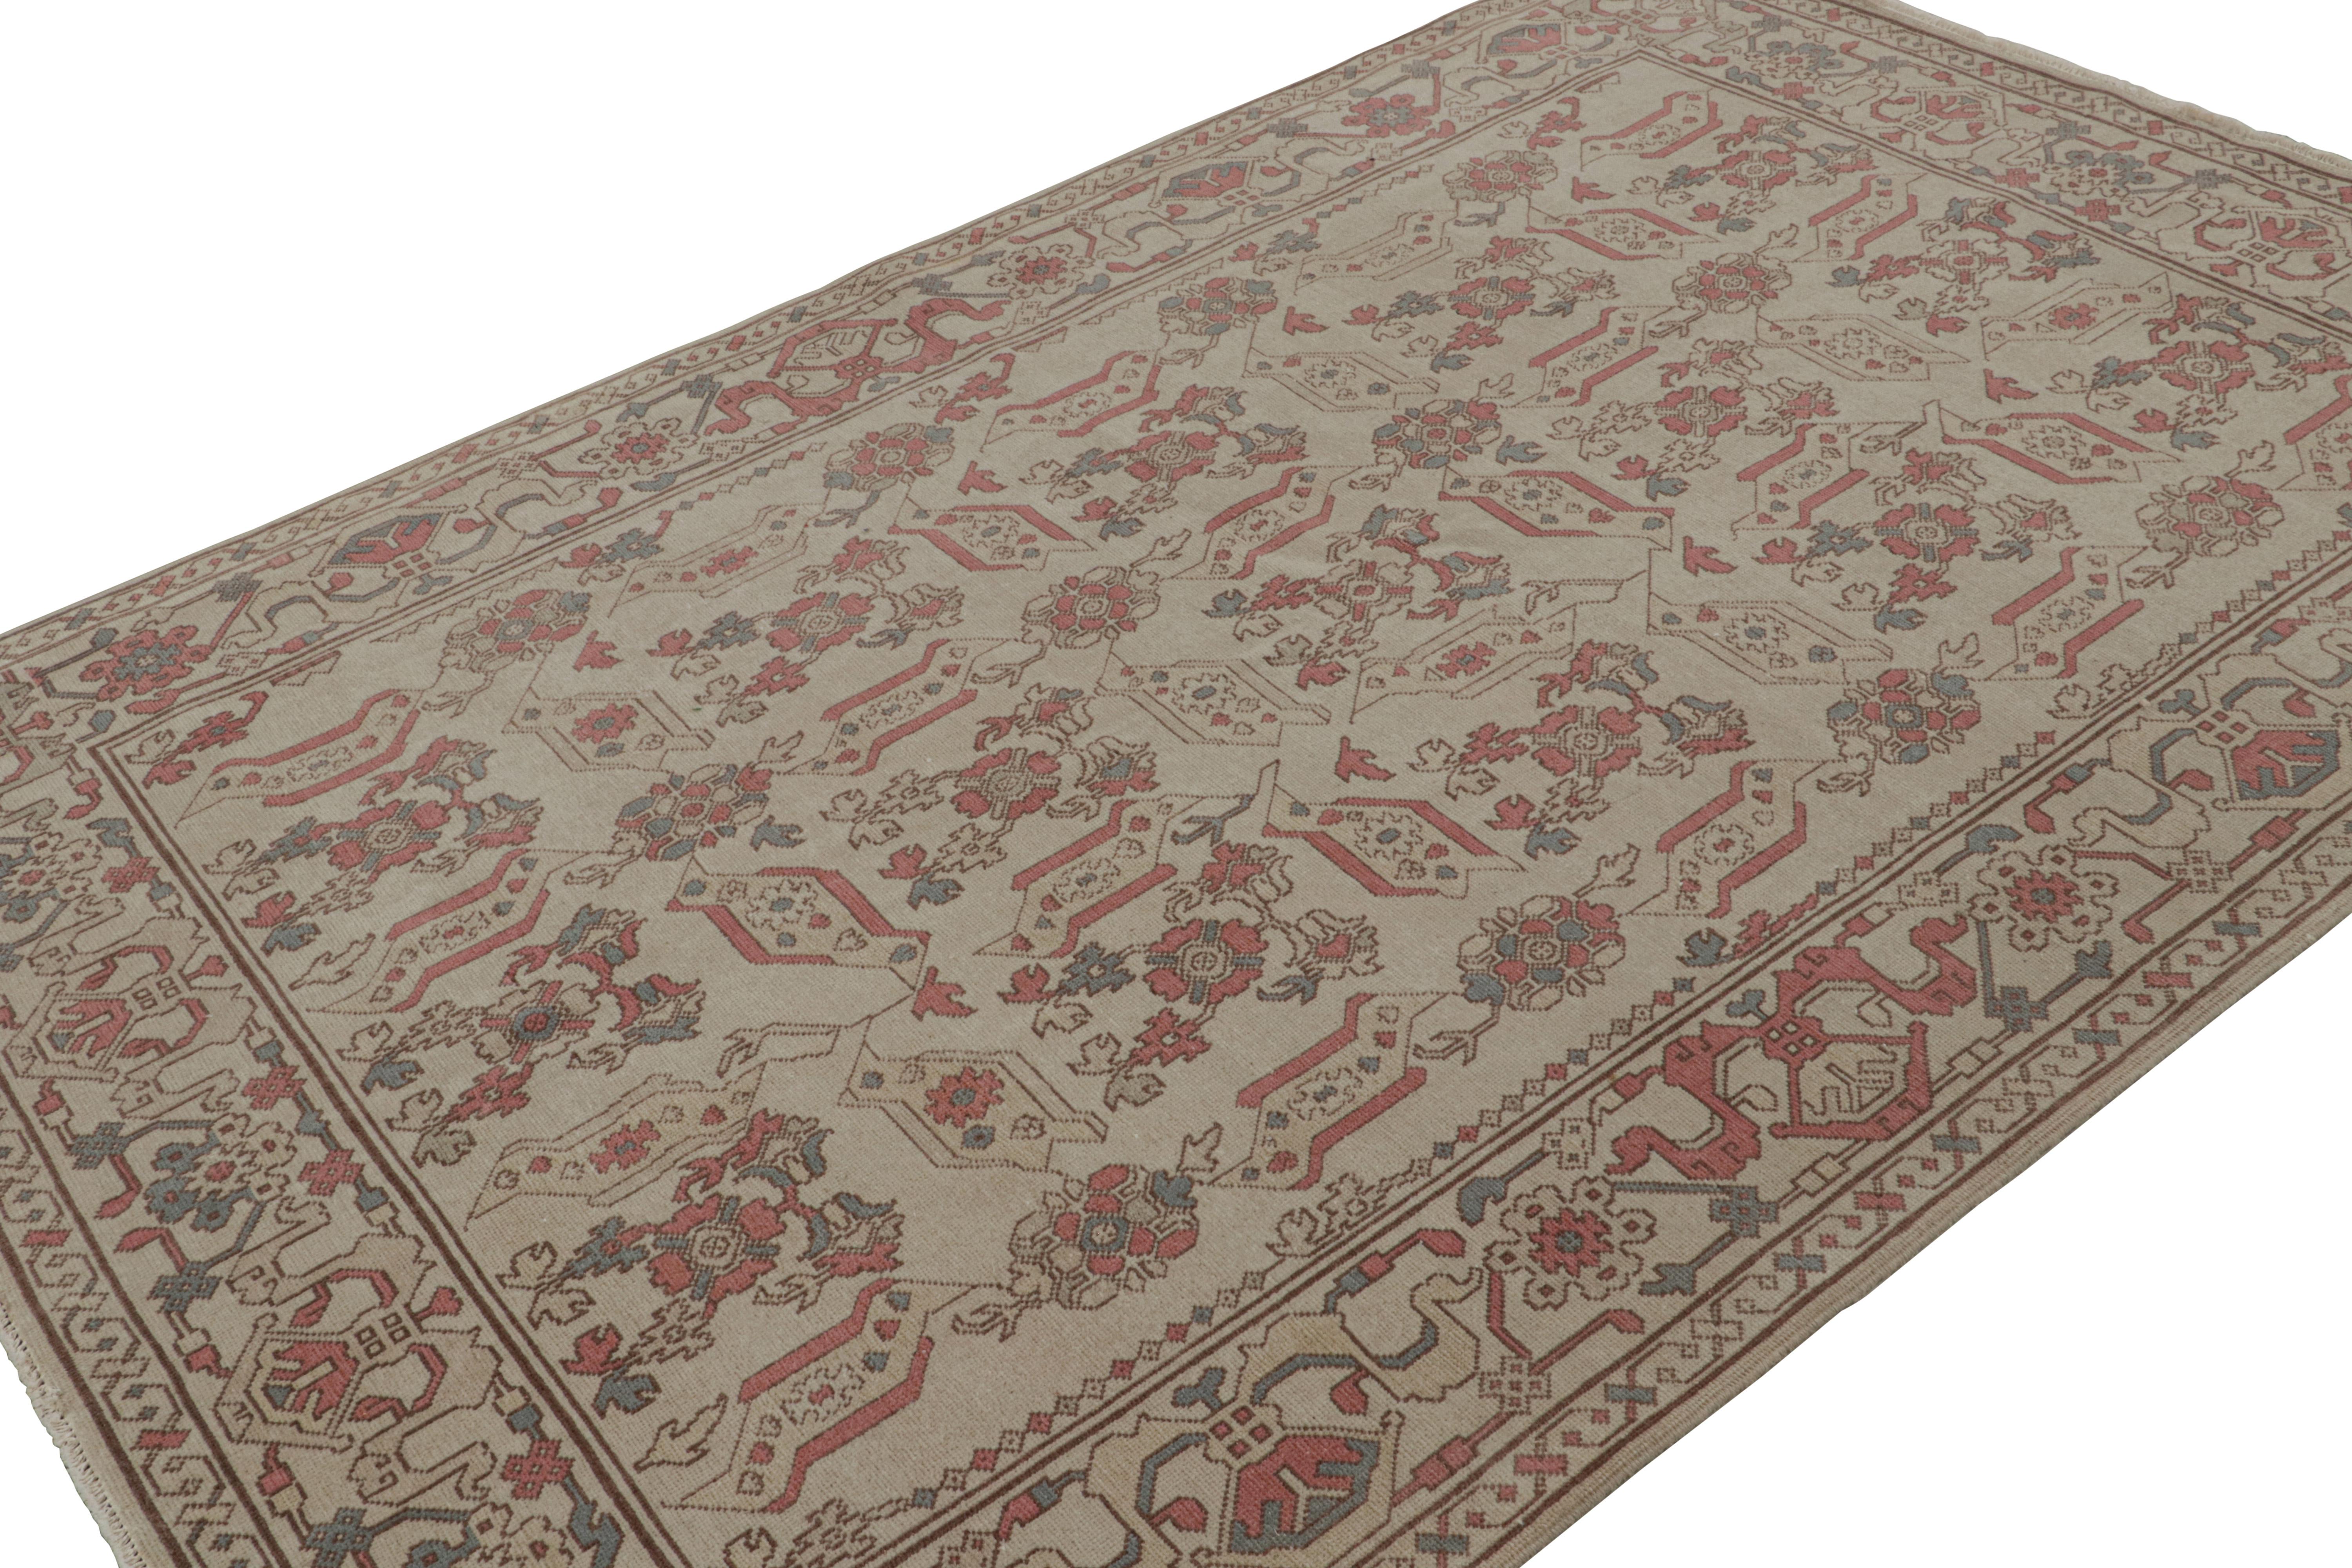 Hand-knotted in wool, this 5x8 vintage Romanian rug features a design as inspired by a 17th century European sensibility, though it’s recaptured in such unique, subversive colors, which makes it extremely collectible. 

On the design: 

Featuring